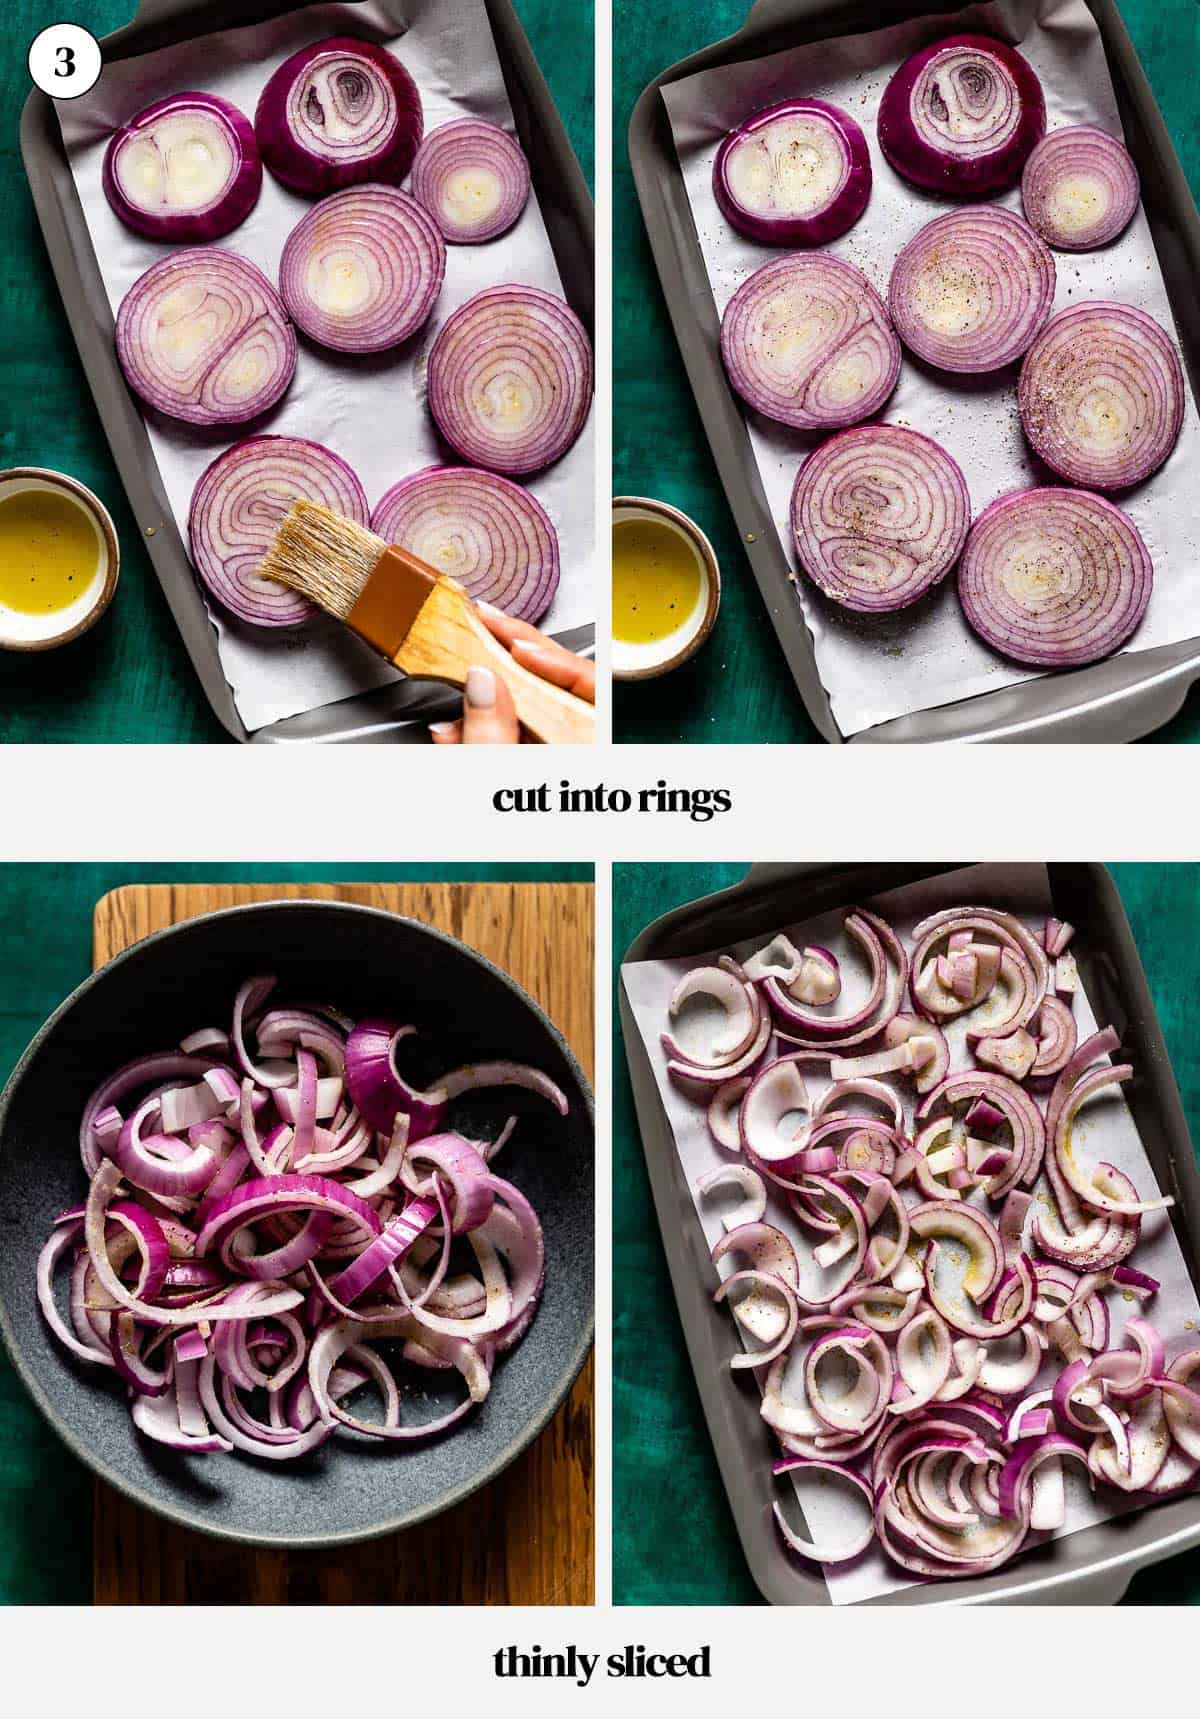 Red onion slices cut and seasoned according to the way they were cut.